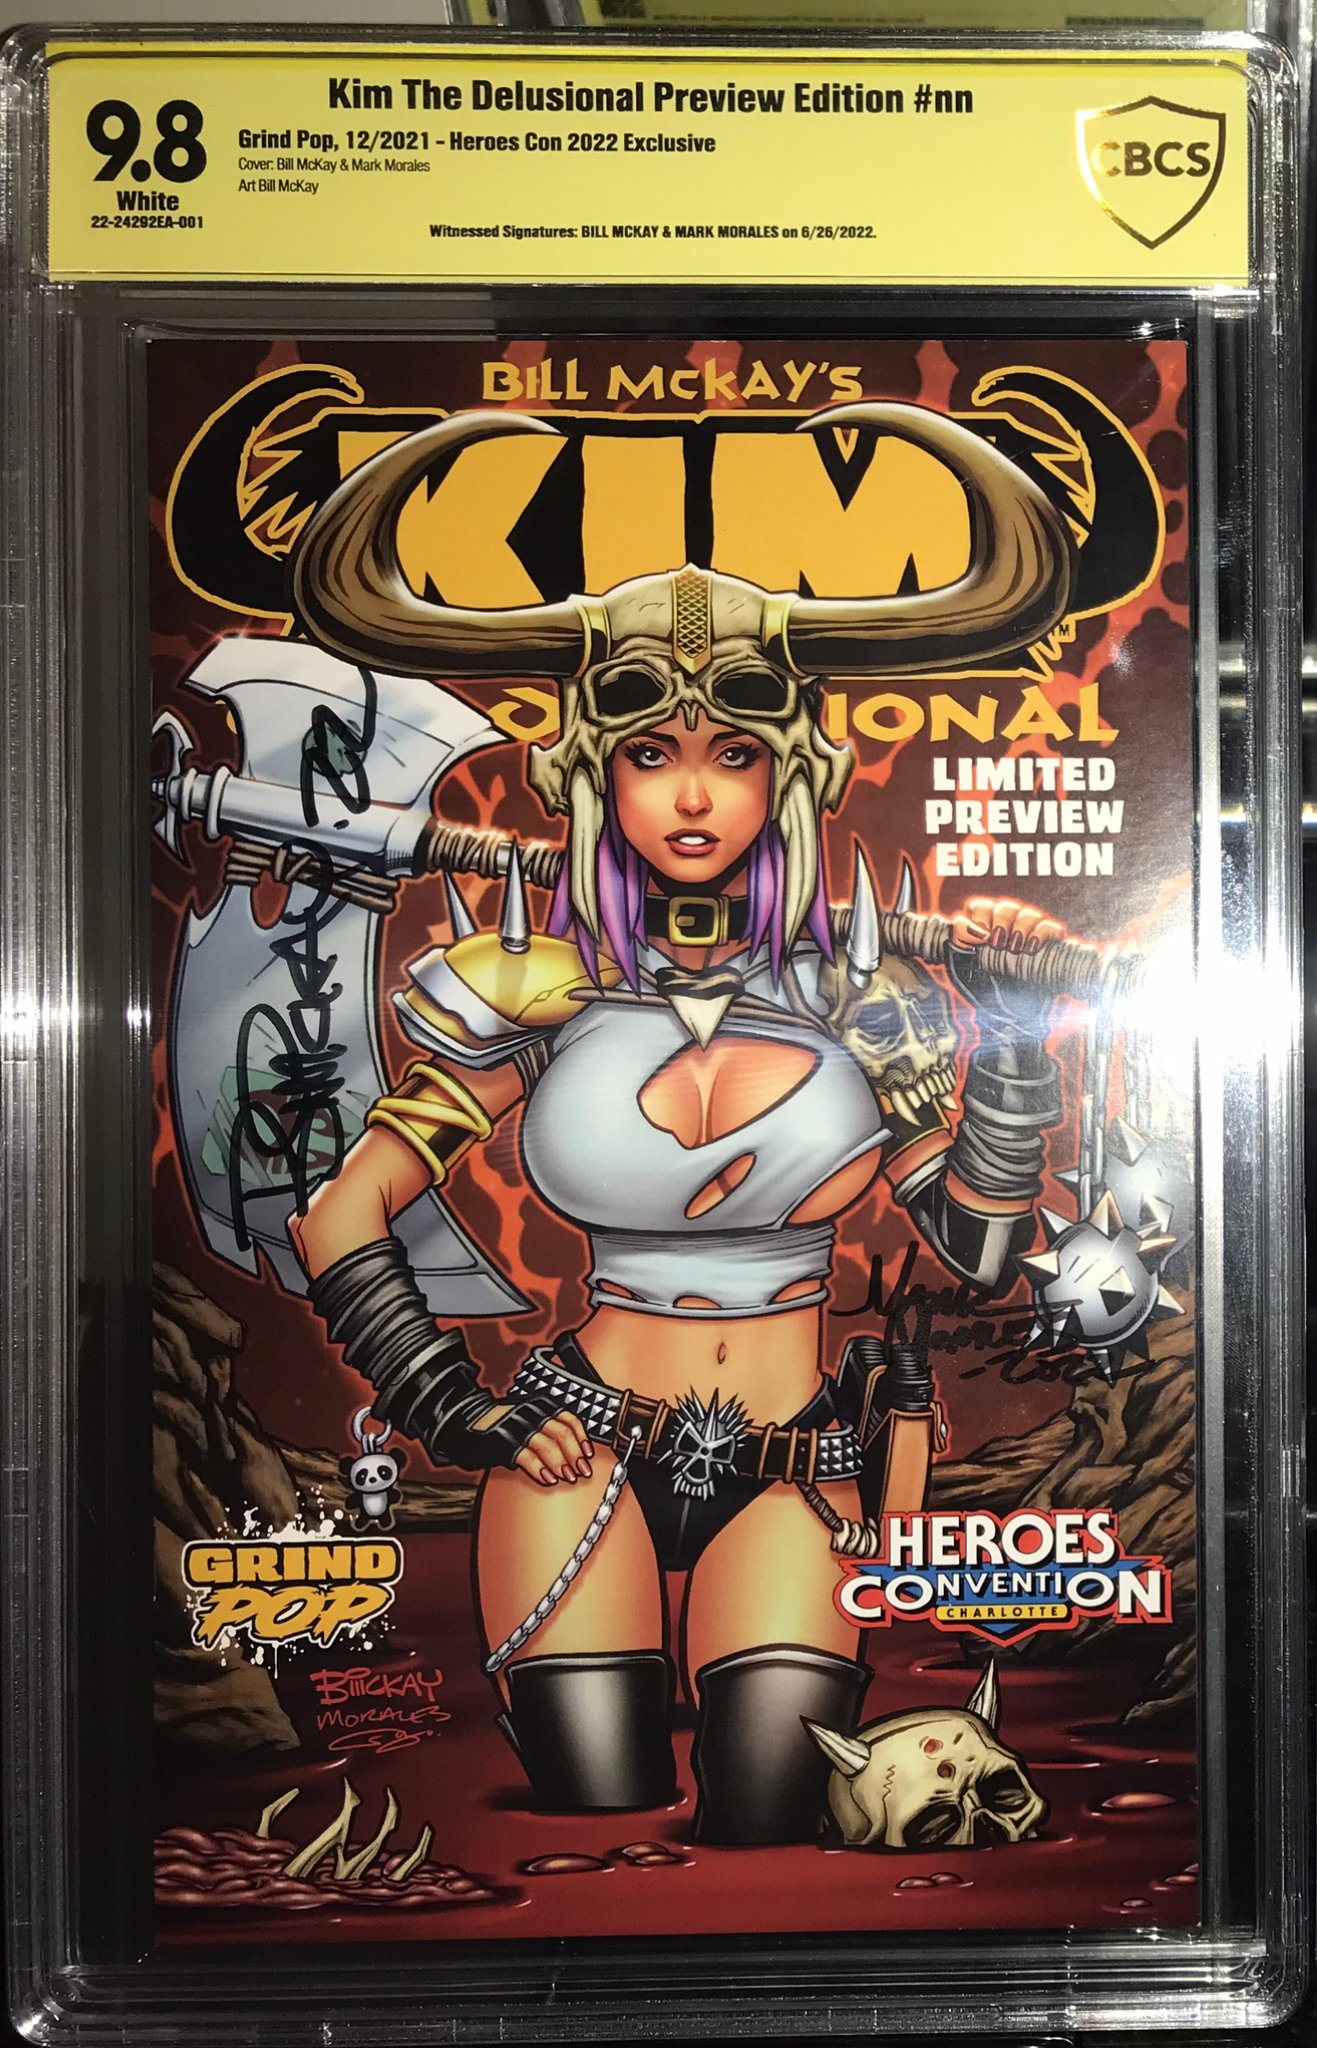 Kim the Delusional Heroes Con 9.8 Exclusive